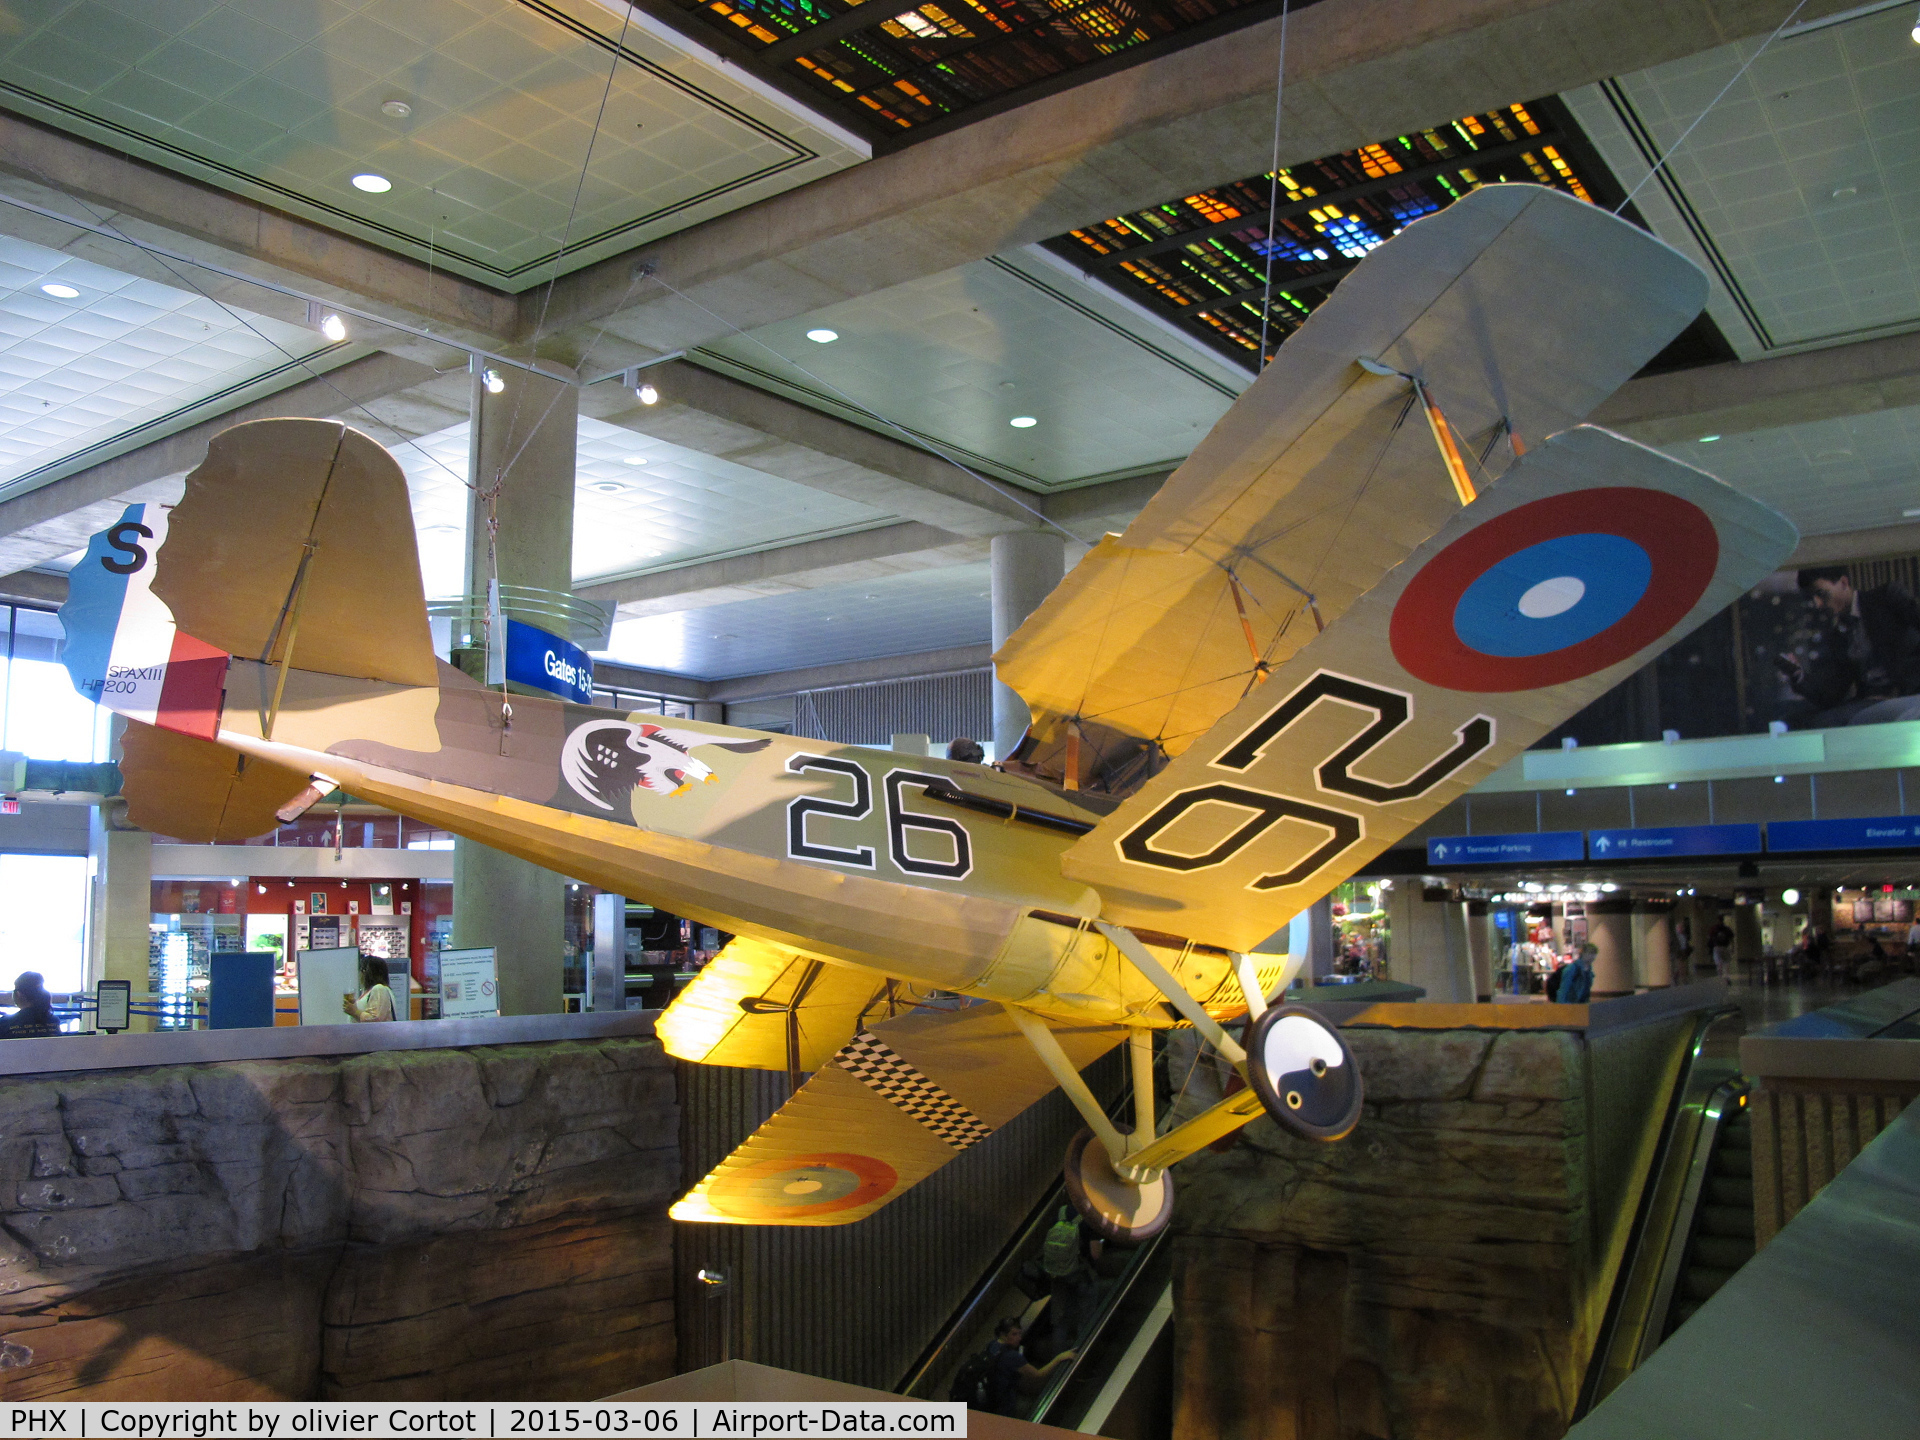 Phoenix Sky Harbor International Airport (PHX) - A real Spad XIII is in the terminal 3